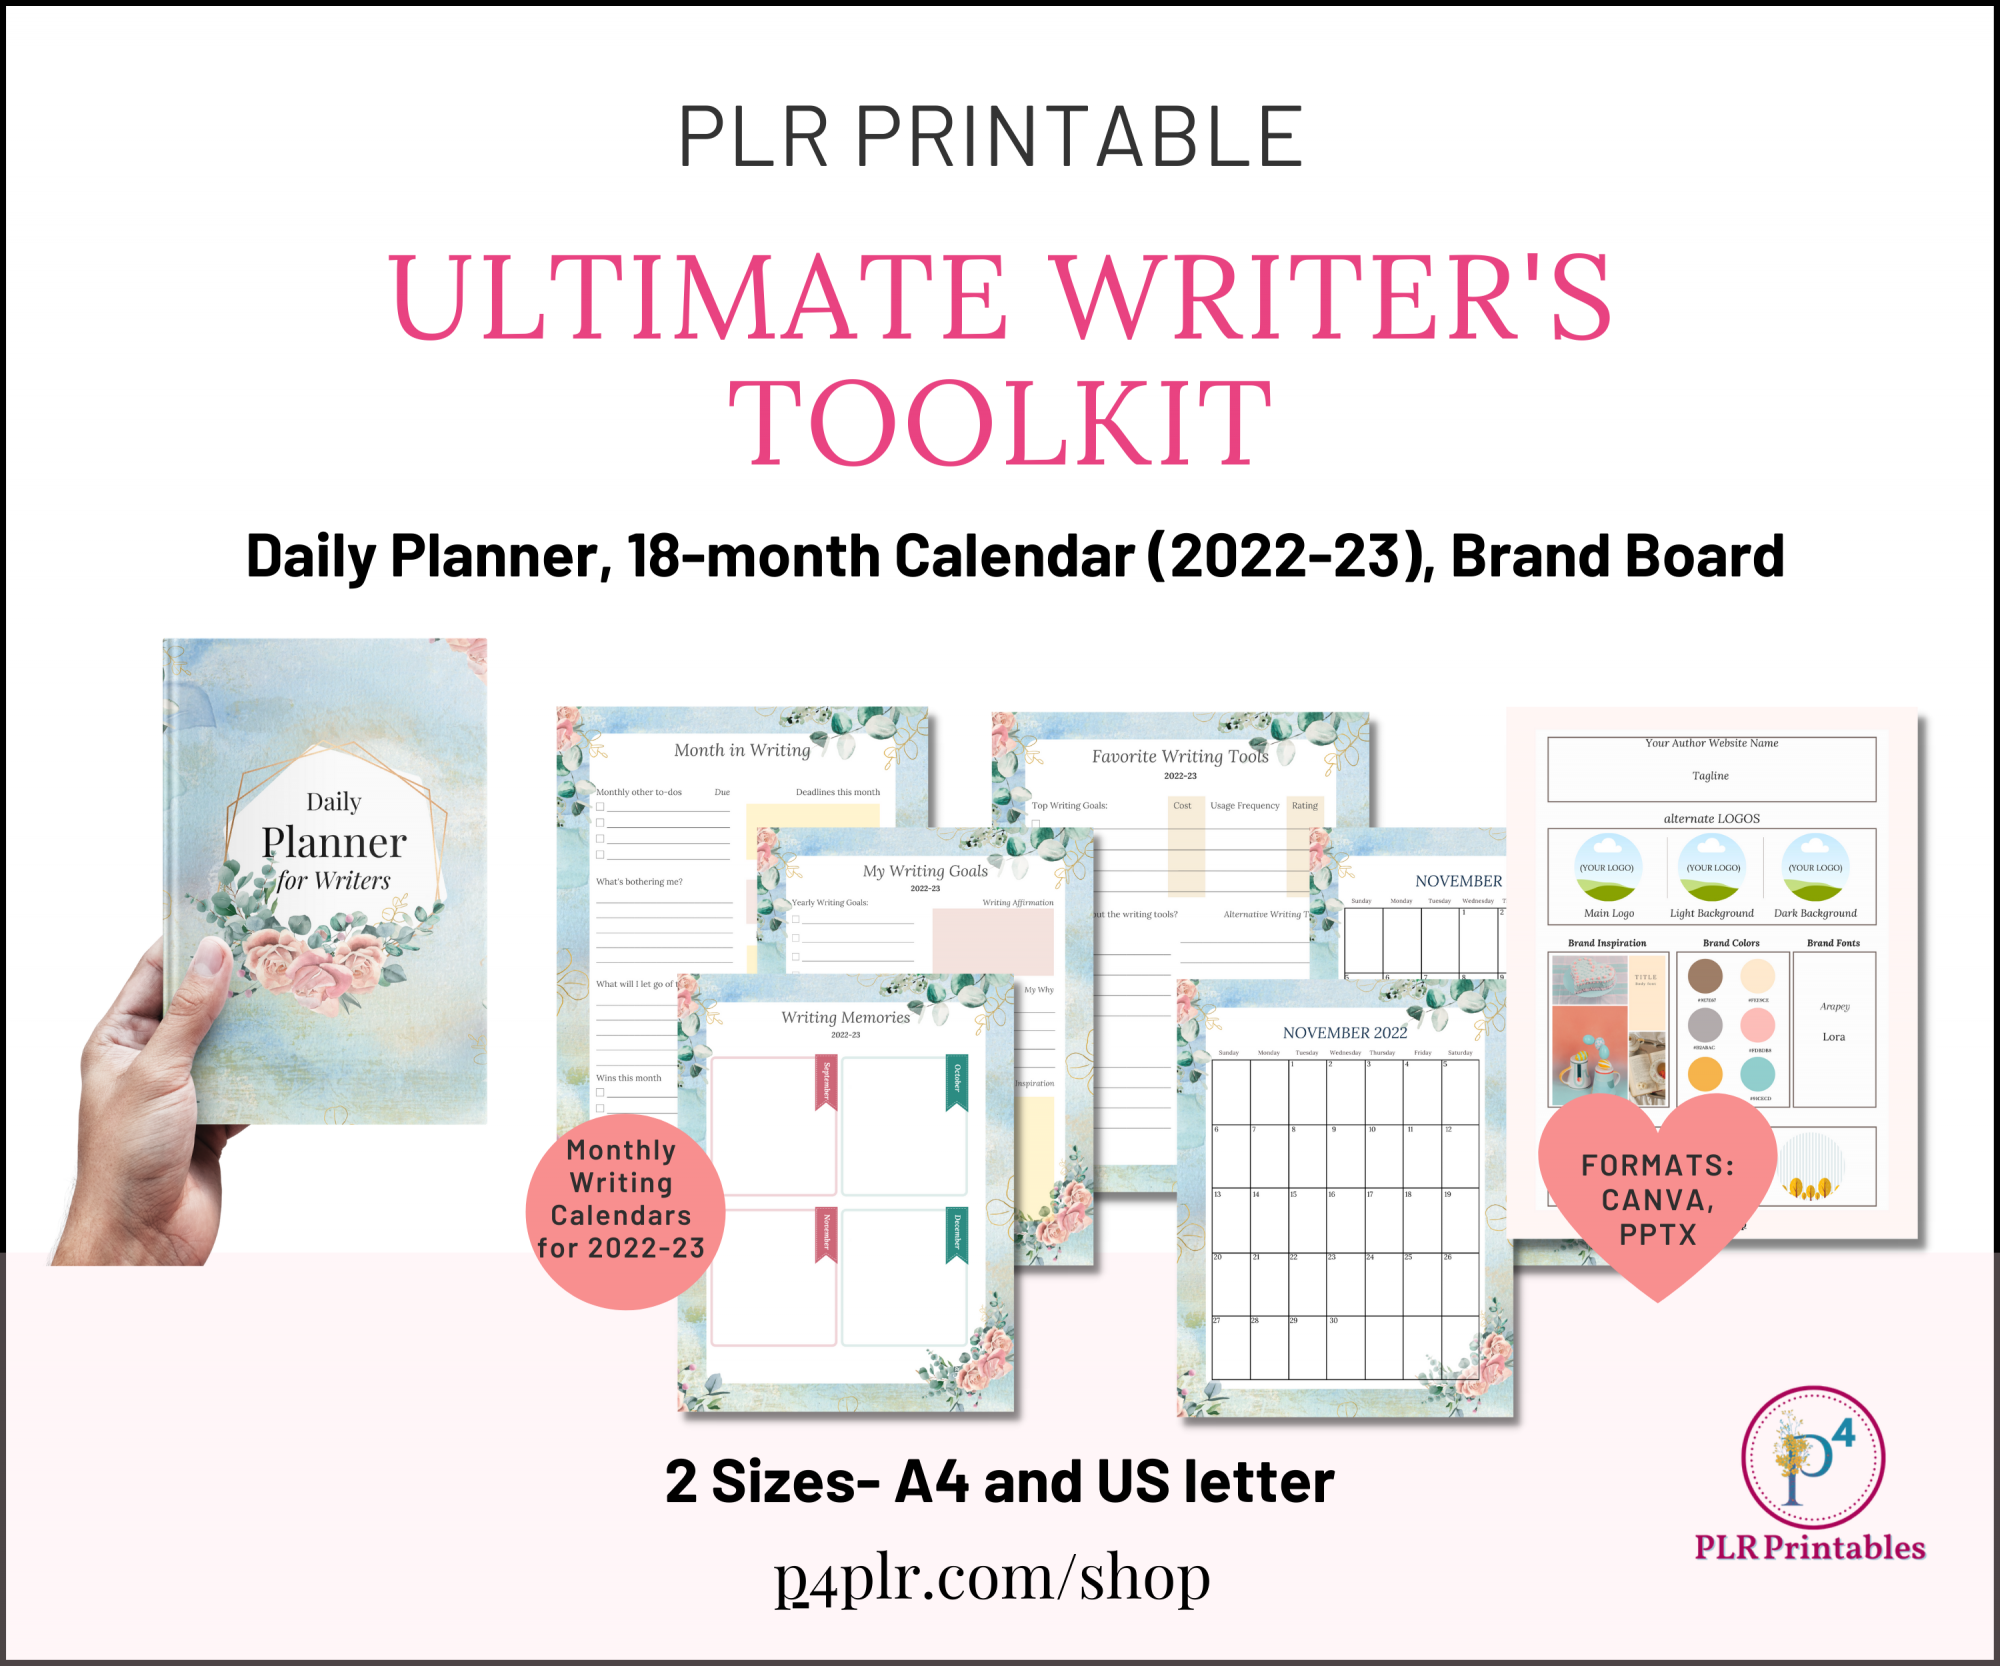 NEW! Ultimate Writer's Toolkit